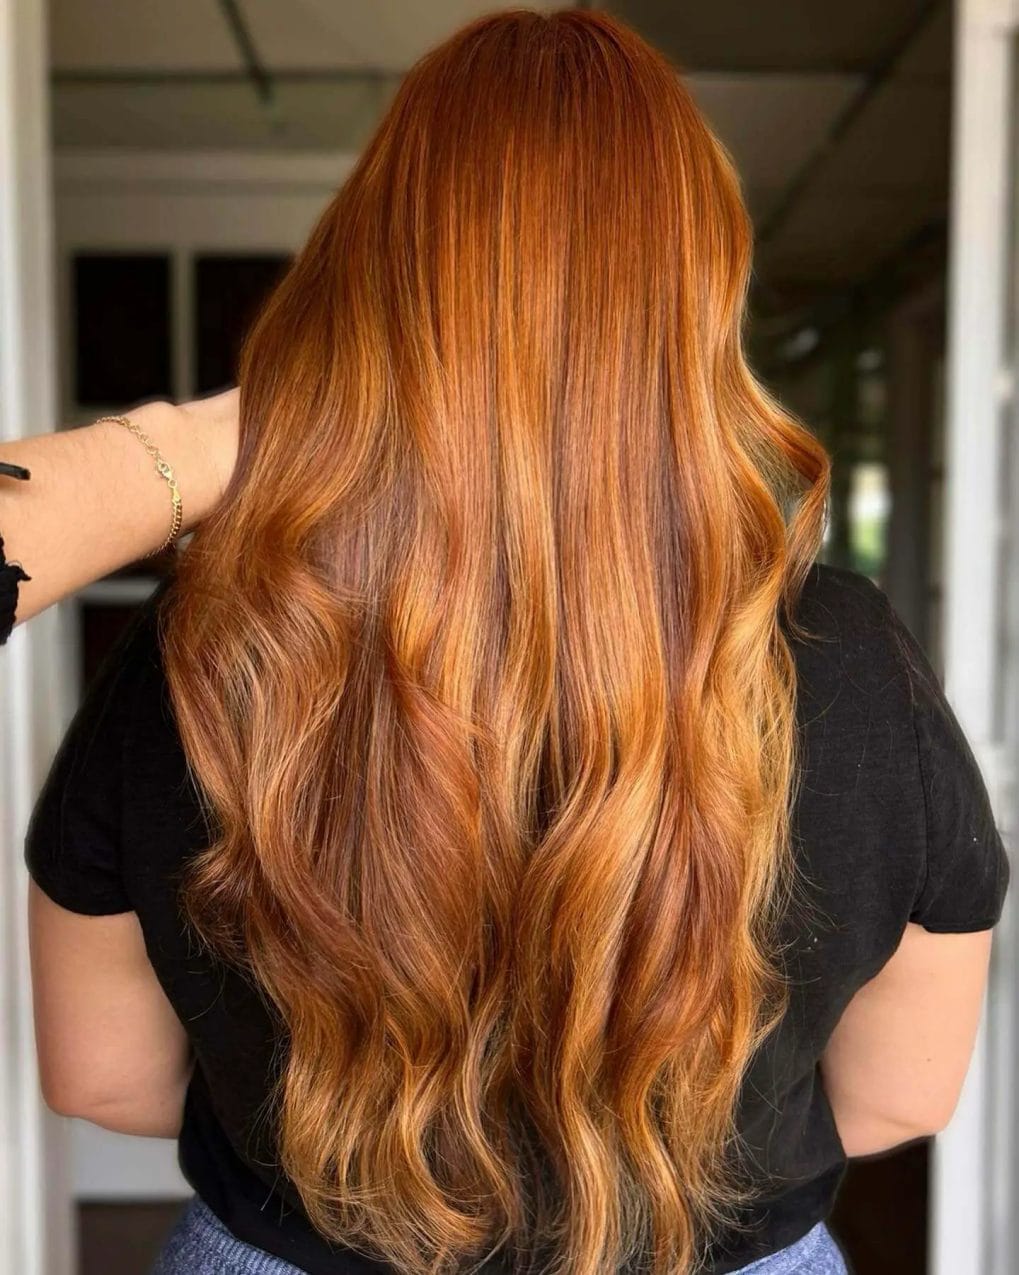 Long layers in a sun-kissed copper spectrum with soft waves.